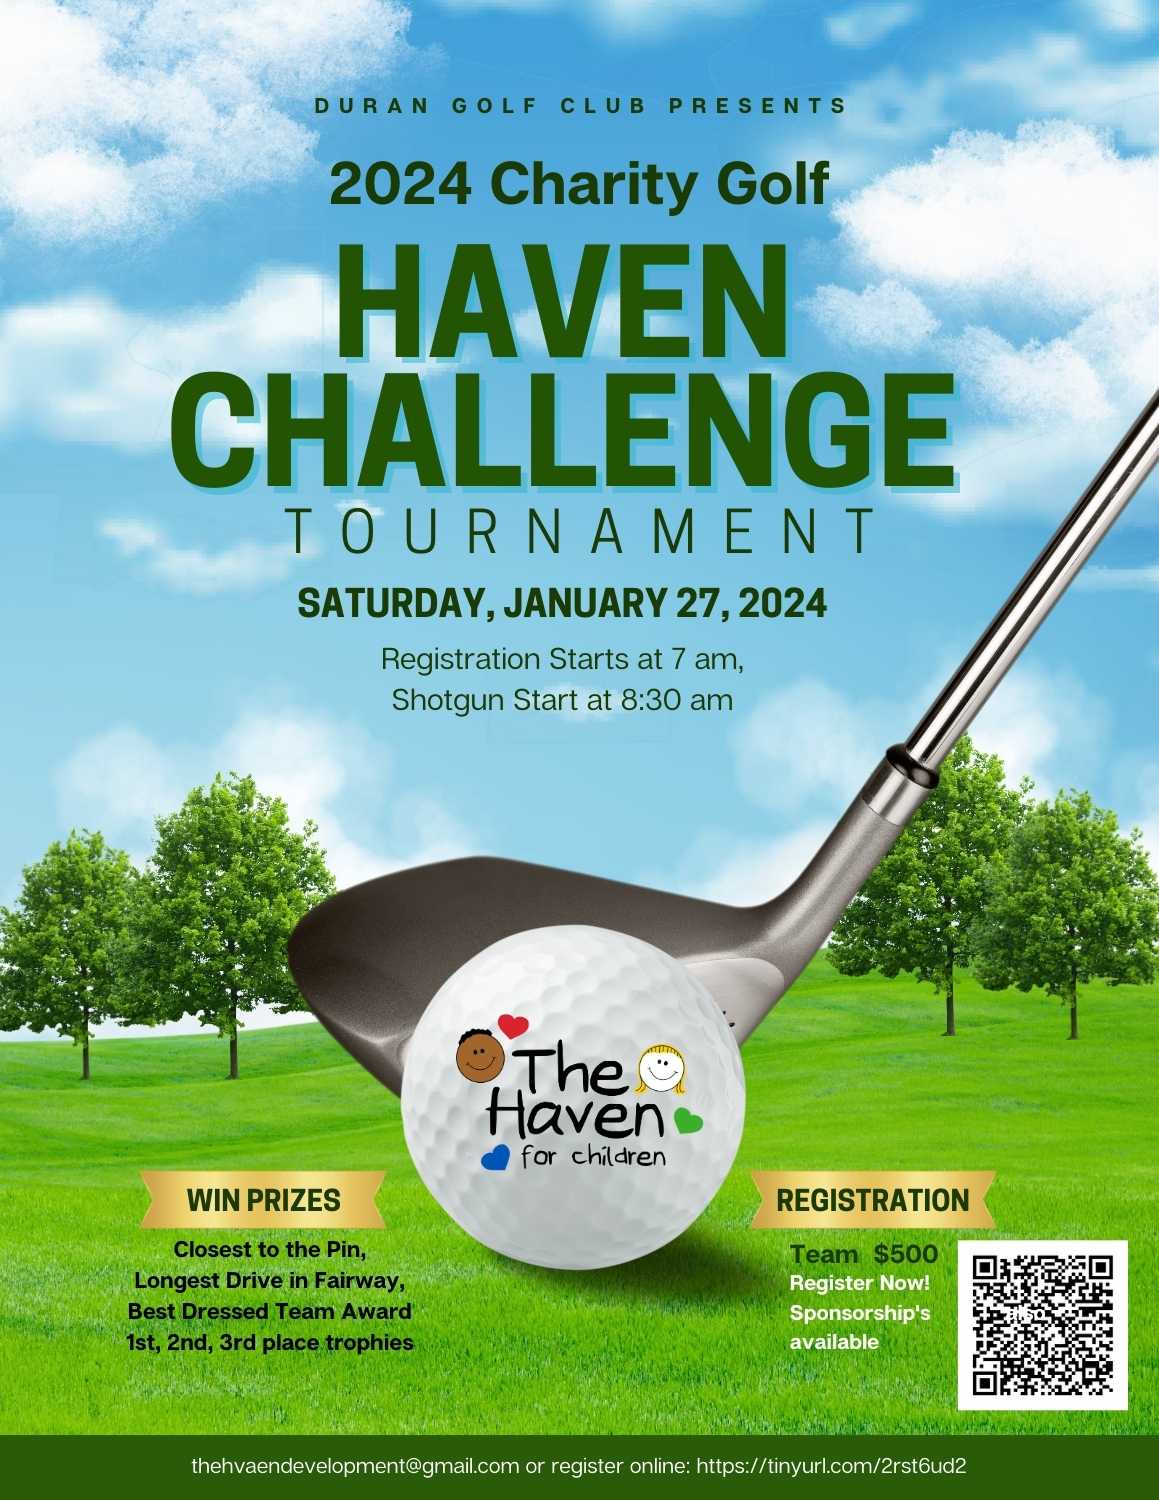 The Haven Golf Challenge at Duran Golf Club Saturday, January 27th, 2024